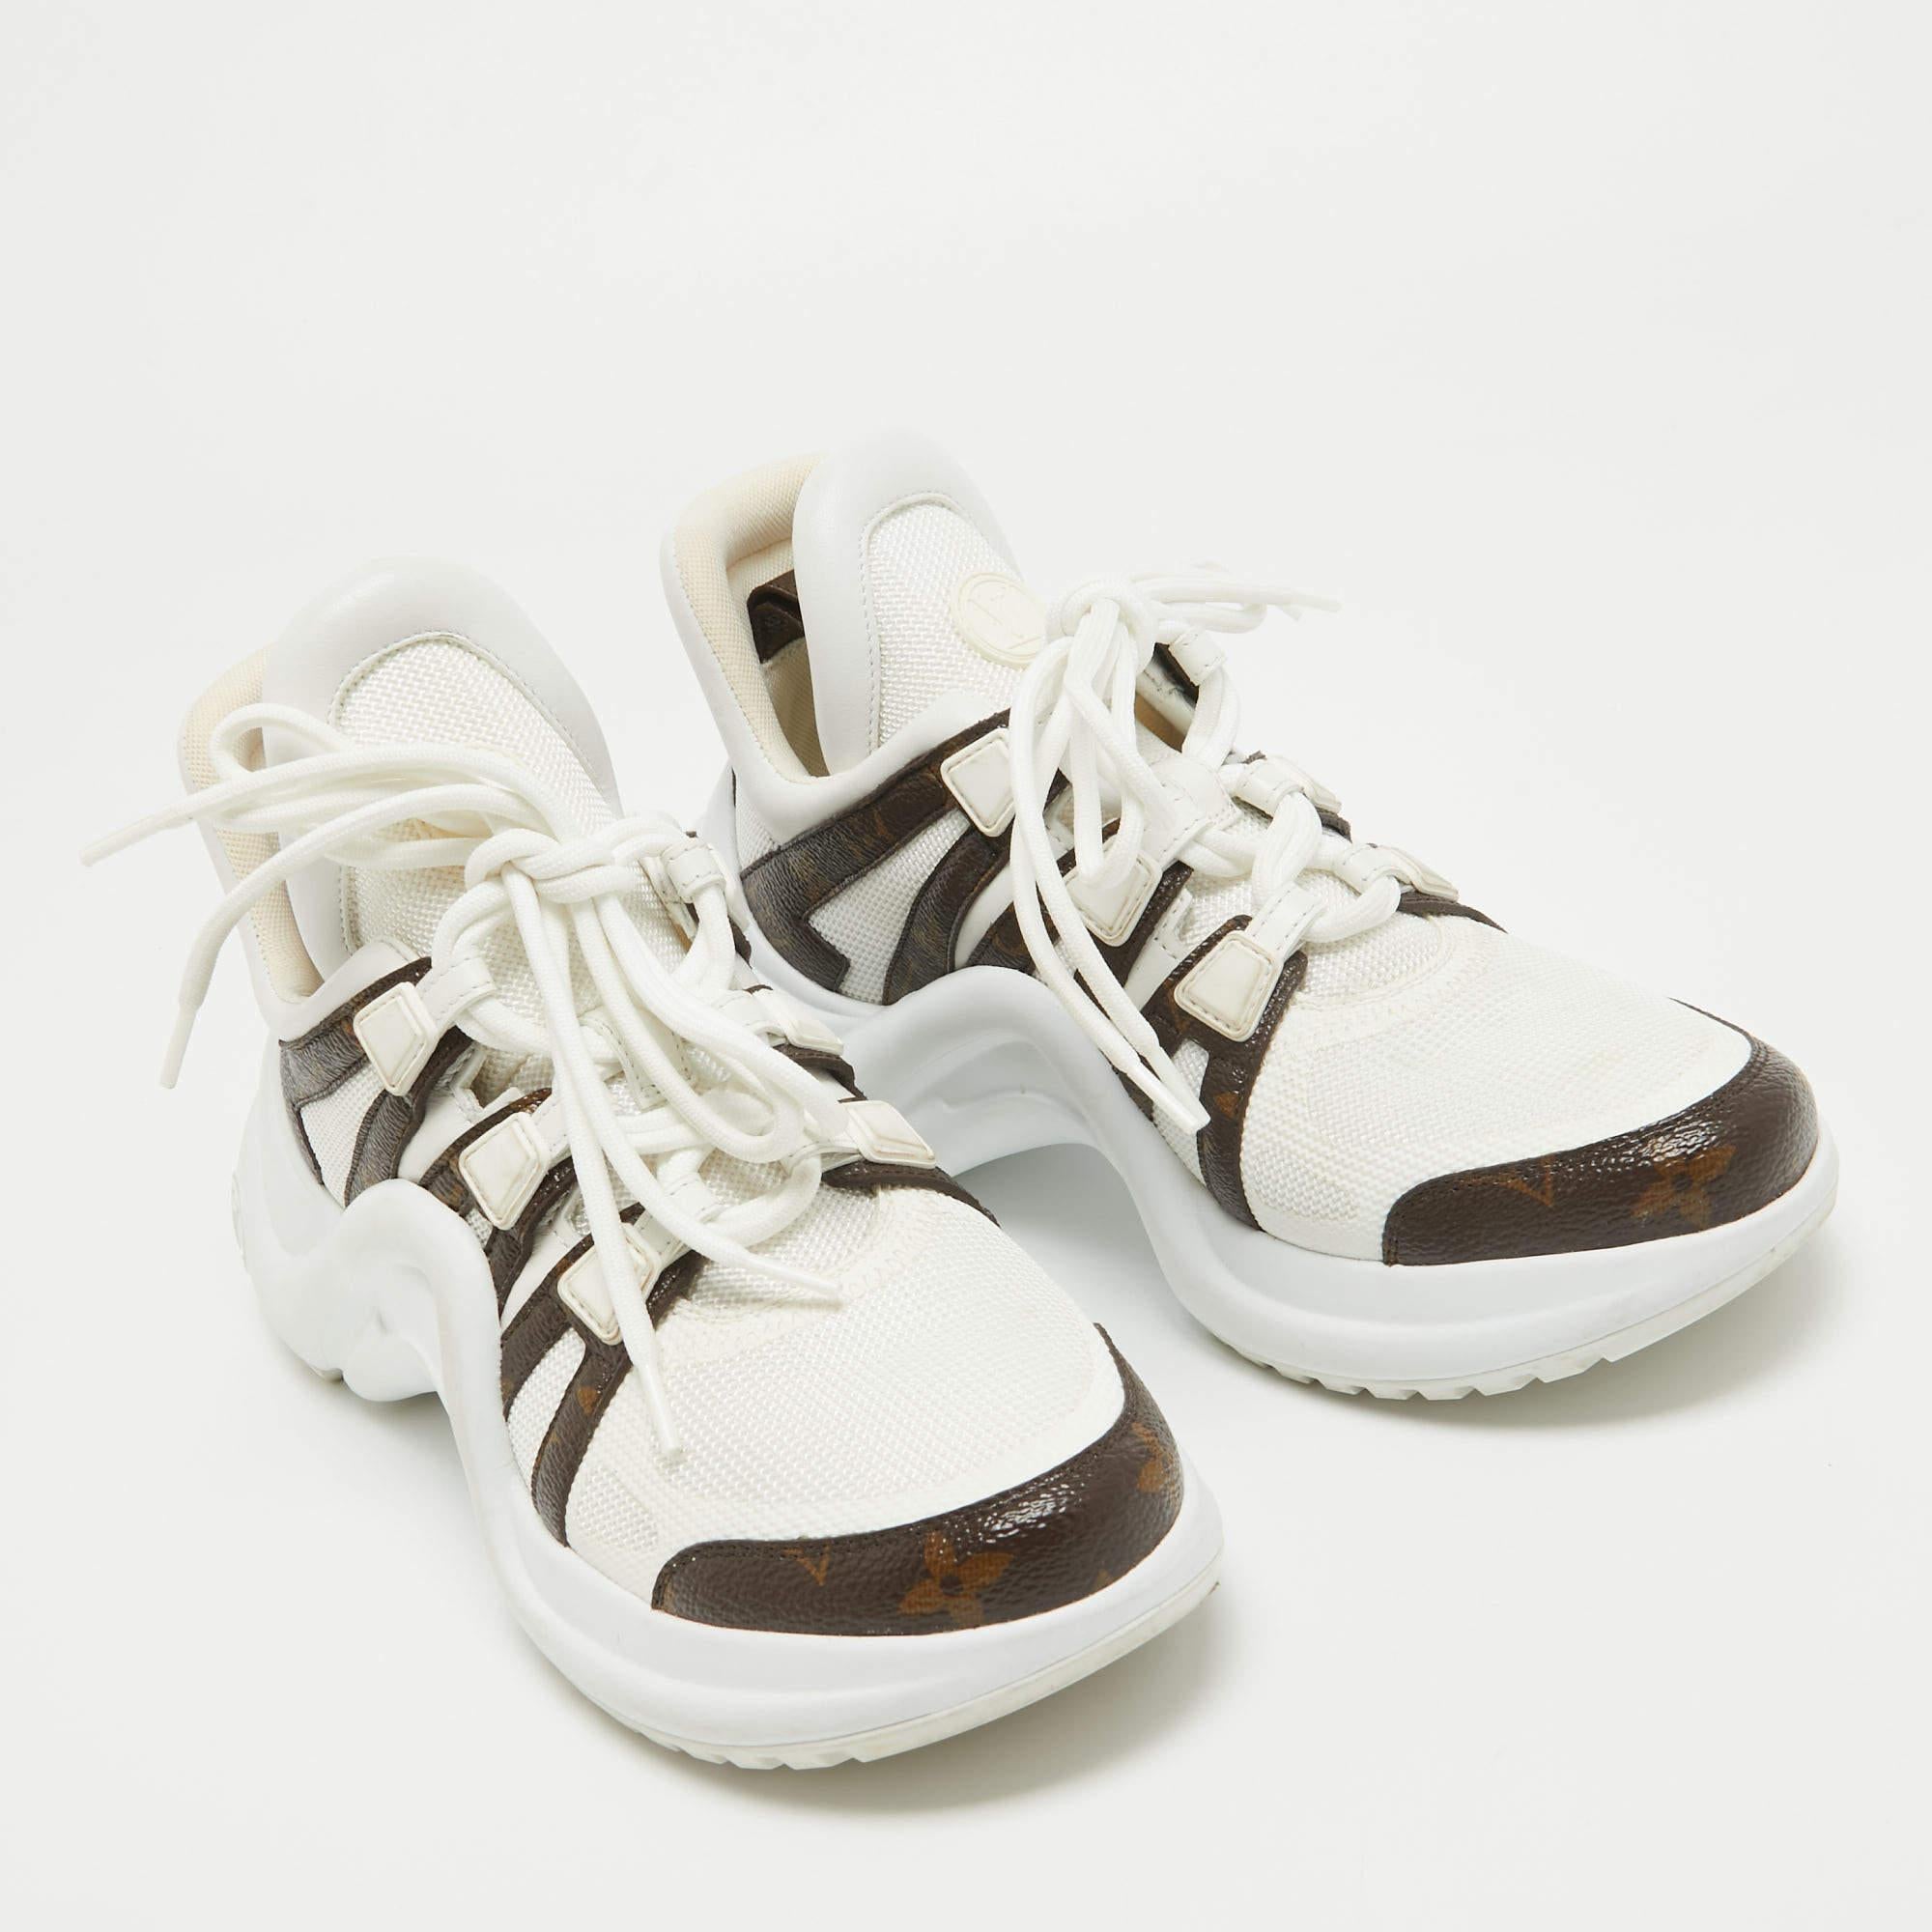 Louis Vuitton White Mesh and Monogram Canvas Archlight Sneakers Size 37.5 2